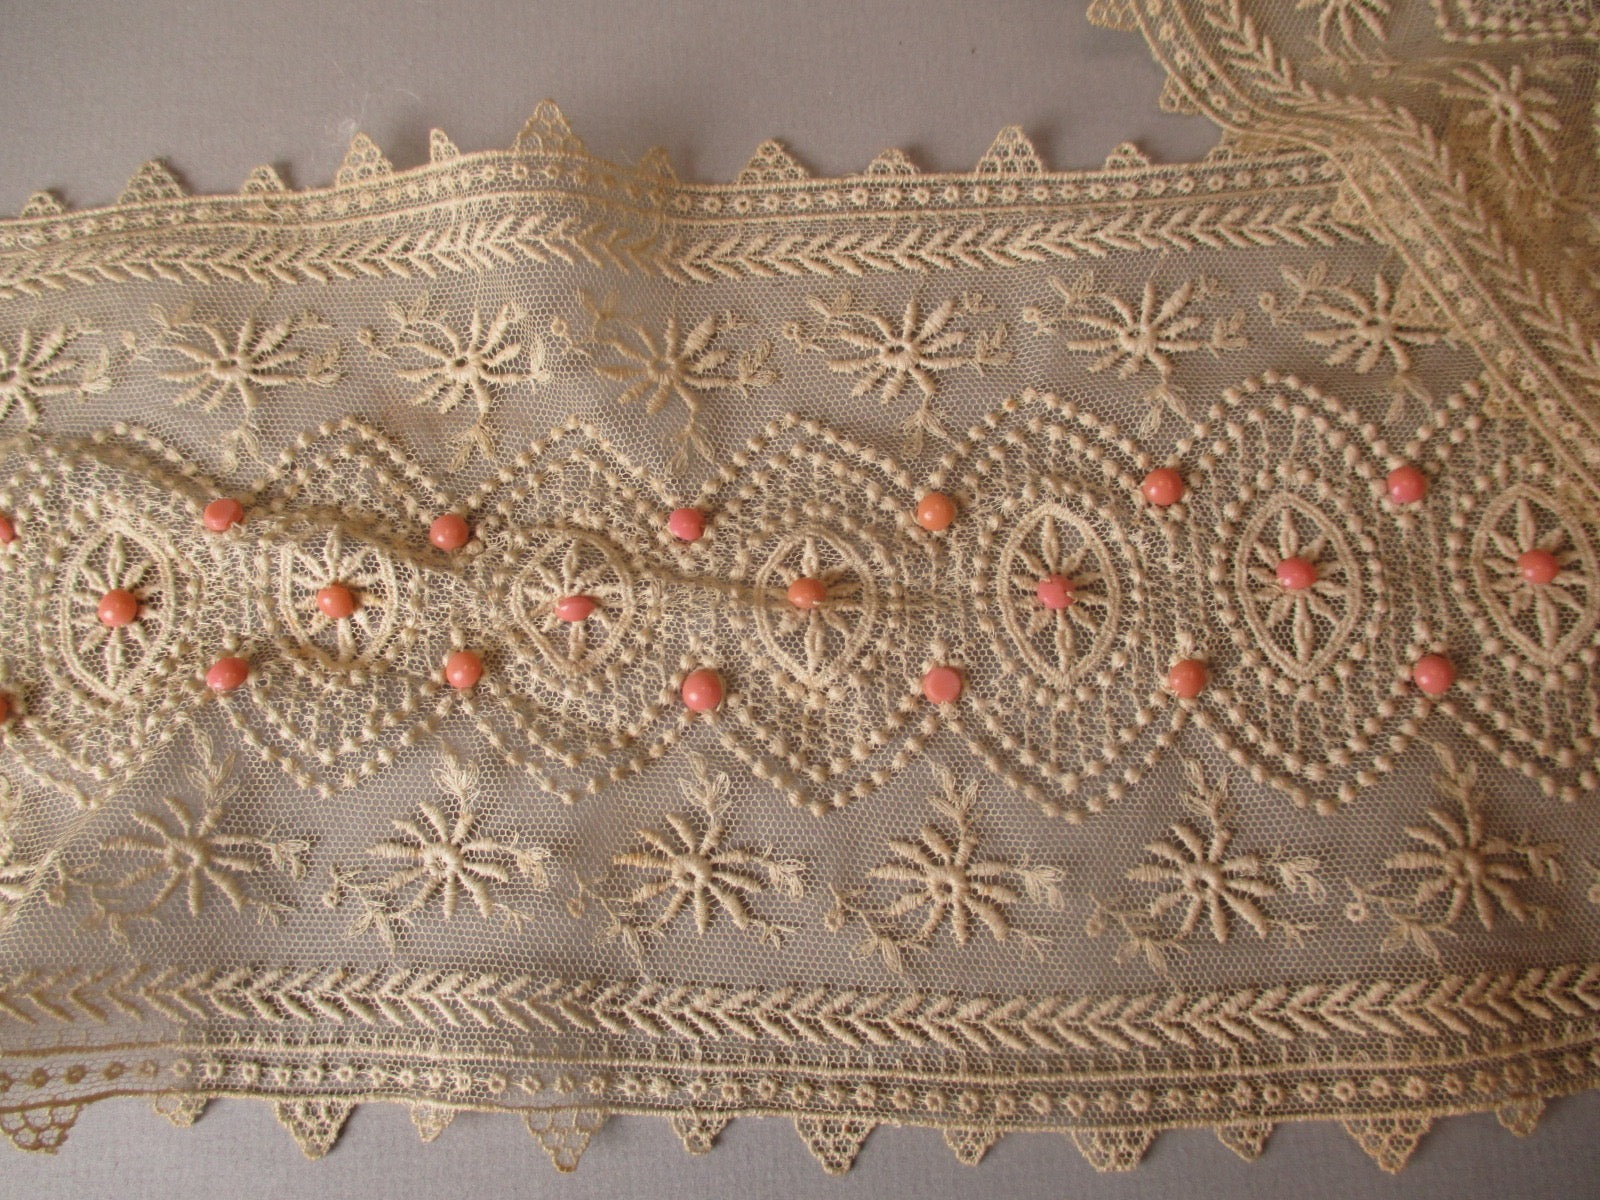 Antique Victorian lace flounce with beads